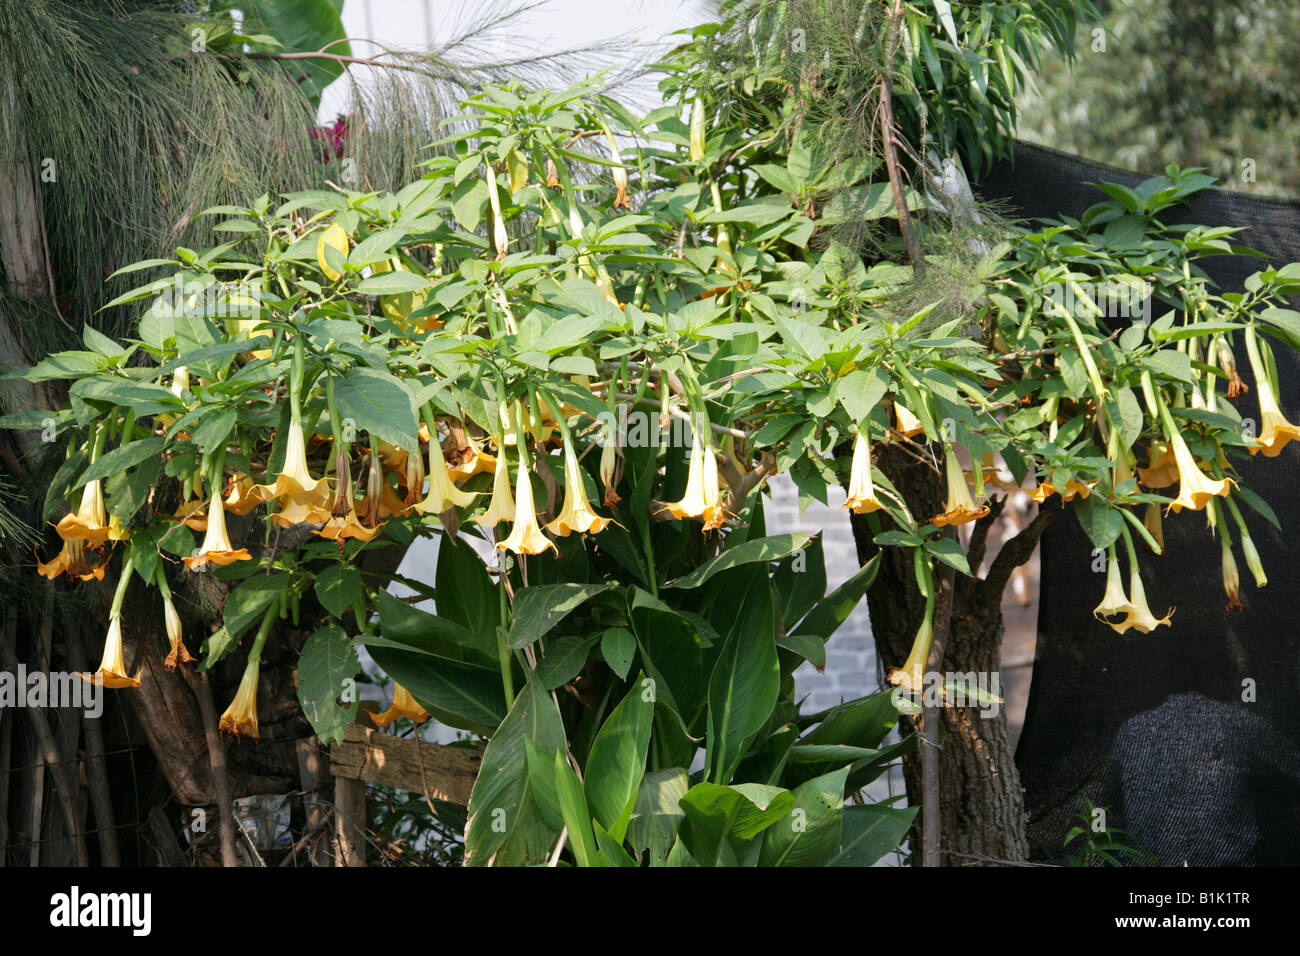 Angel's Trumpet Tree Brugmansia suaveolens Solanaceae Growing Alongside the Canals of the Floating Gardens of Xochimilco Mexico Stock Photo